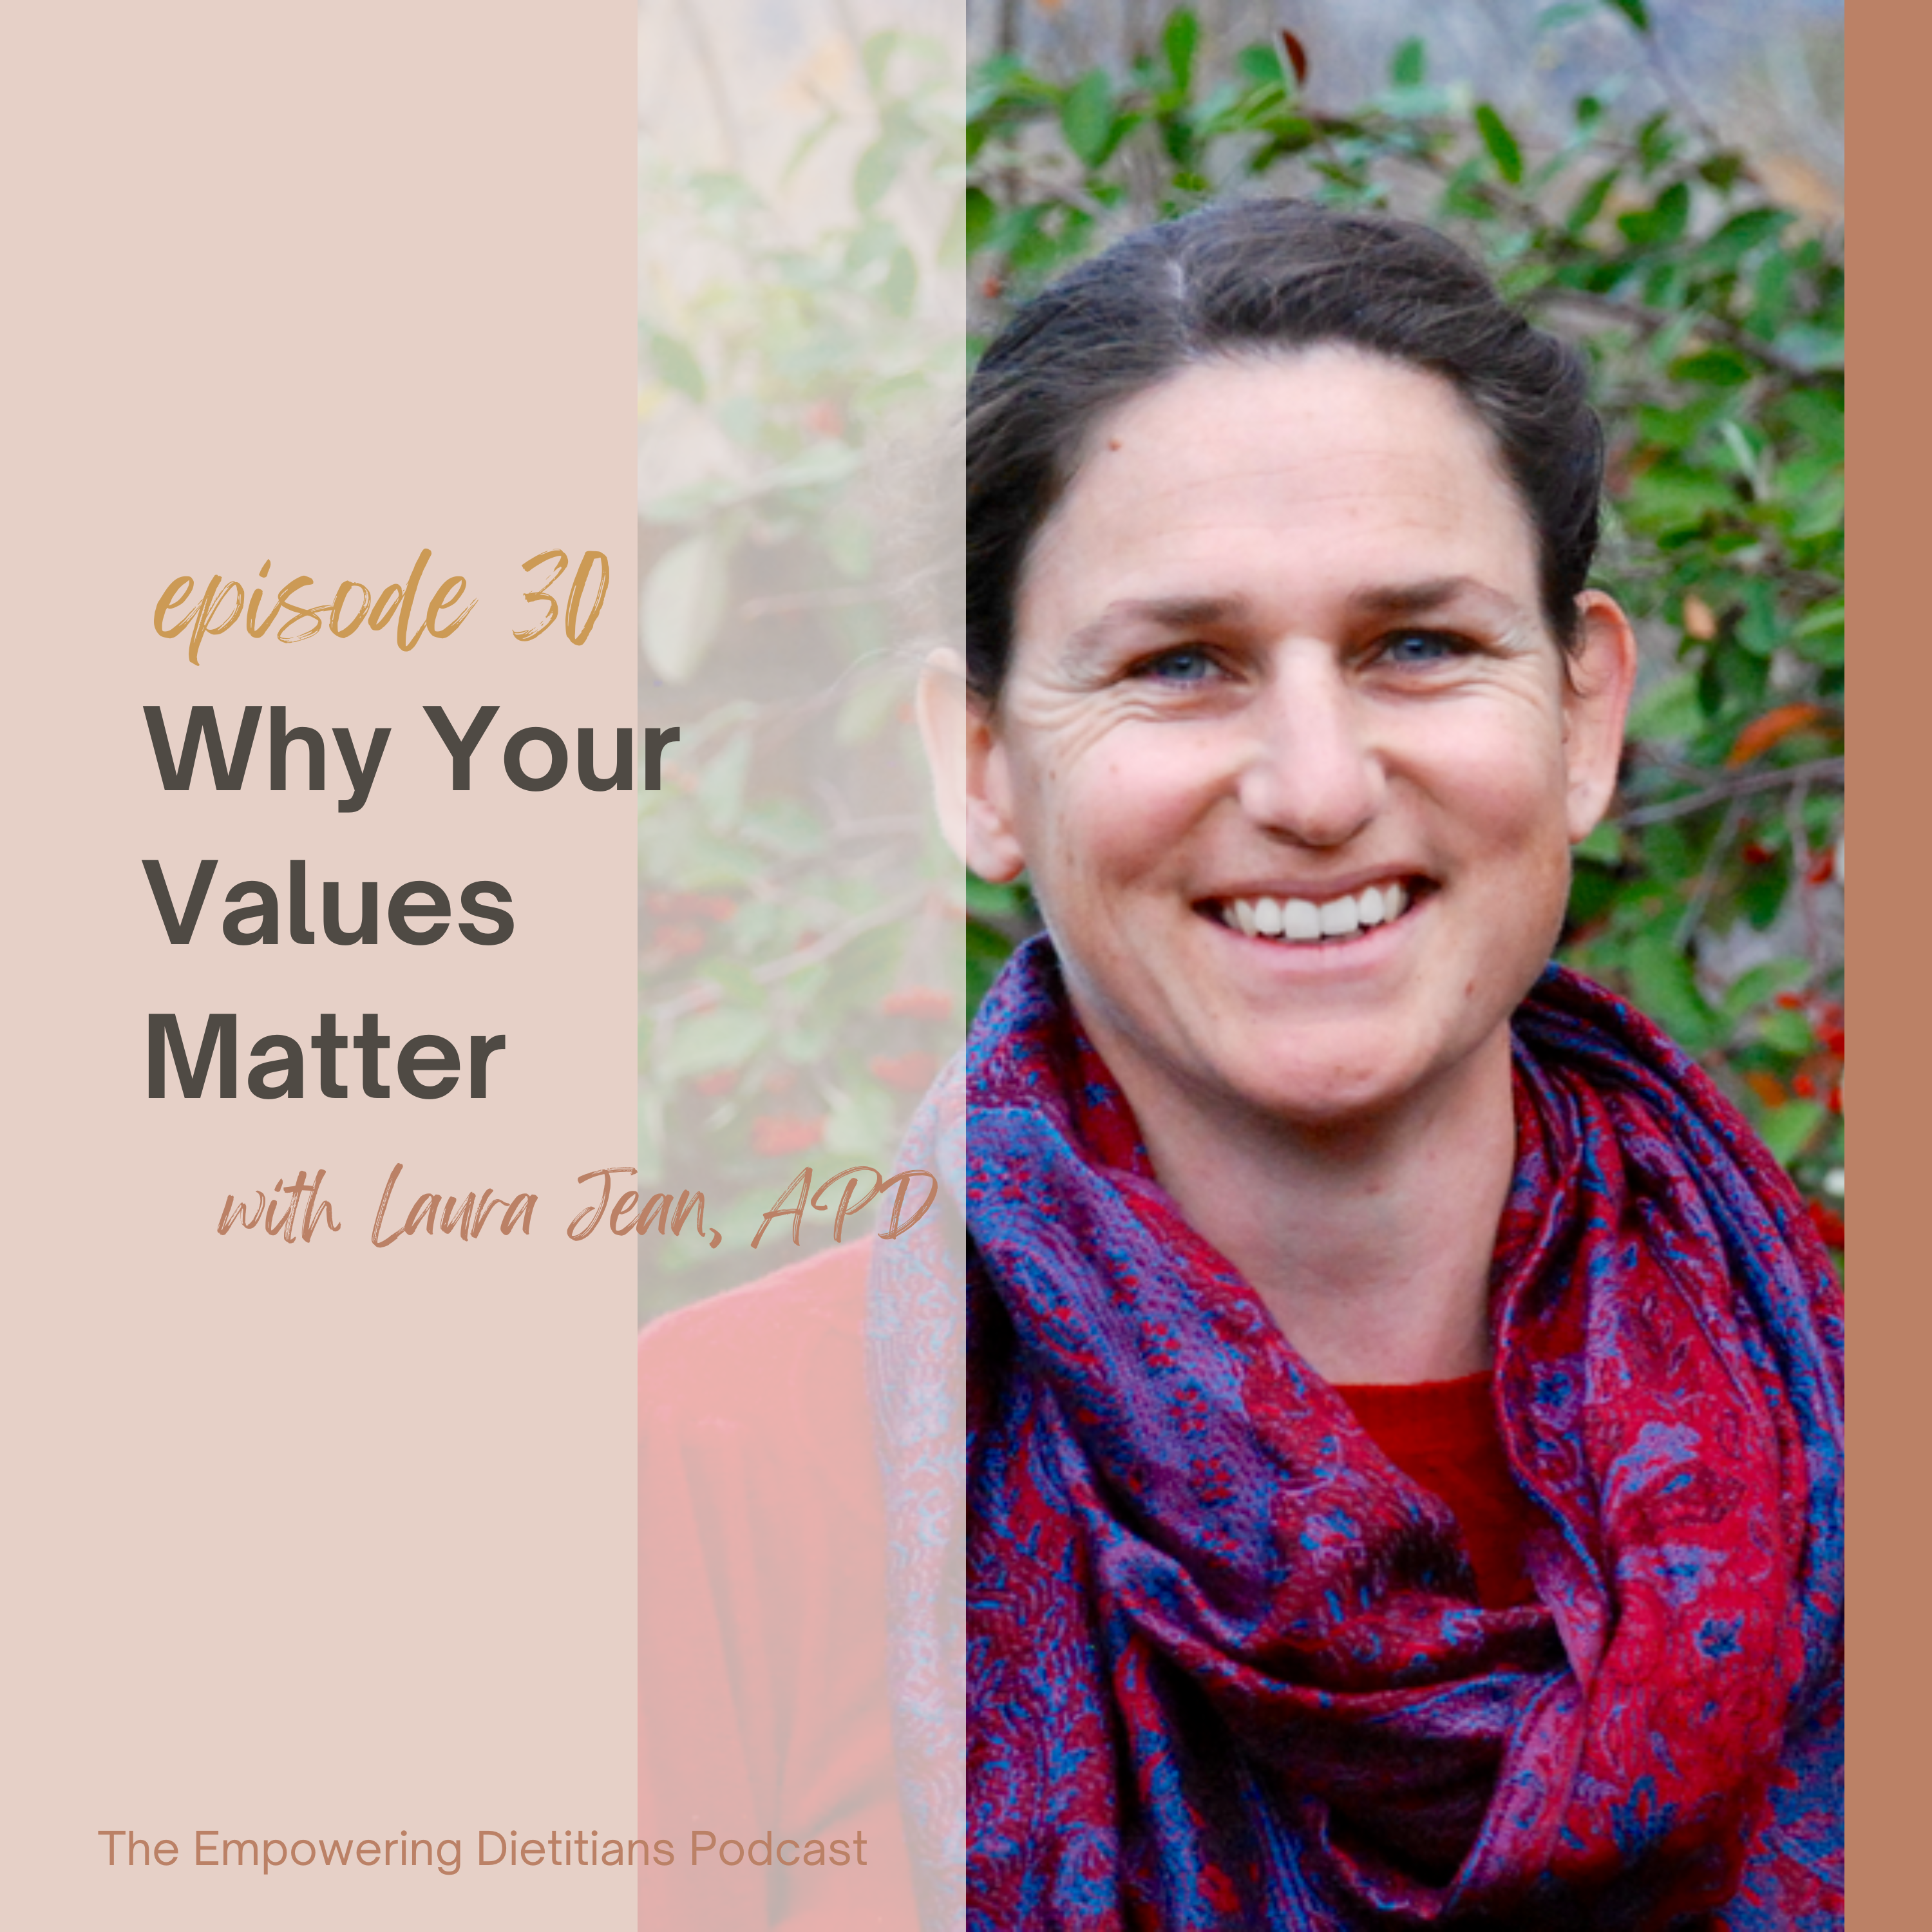 why your values matter as a dietitian with laura jean